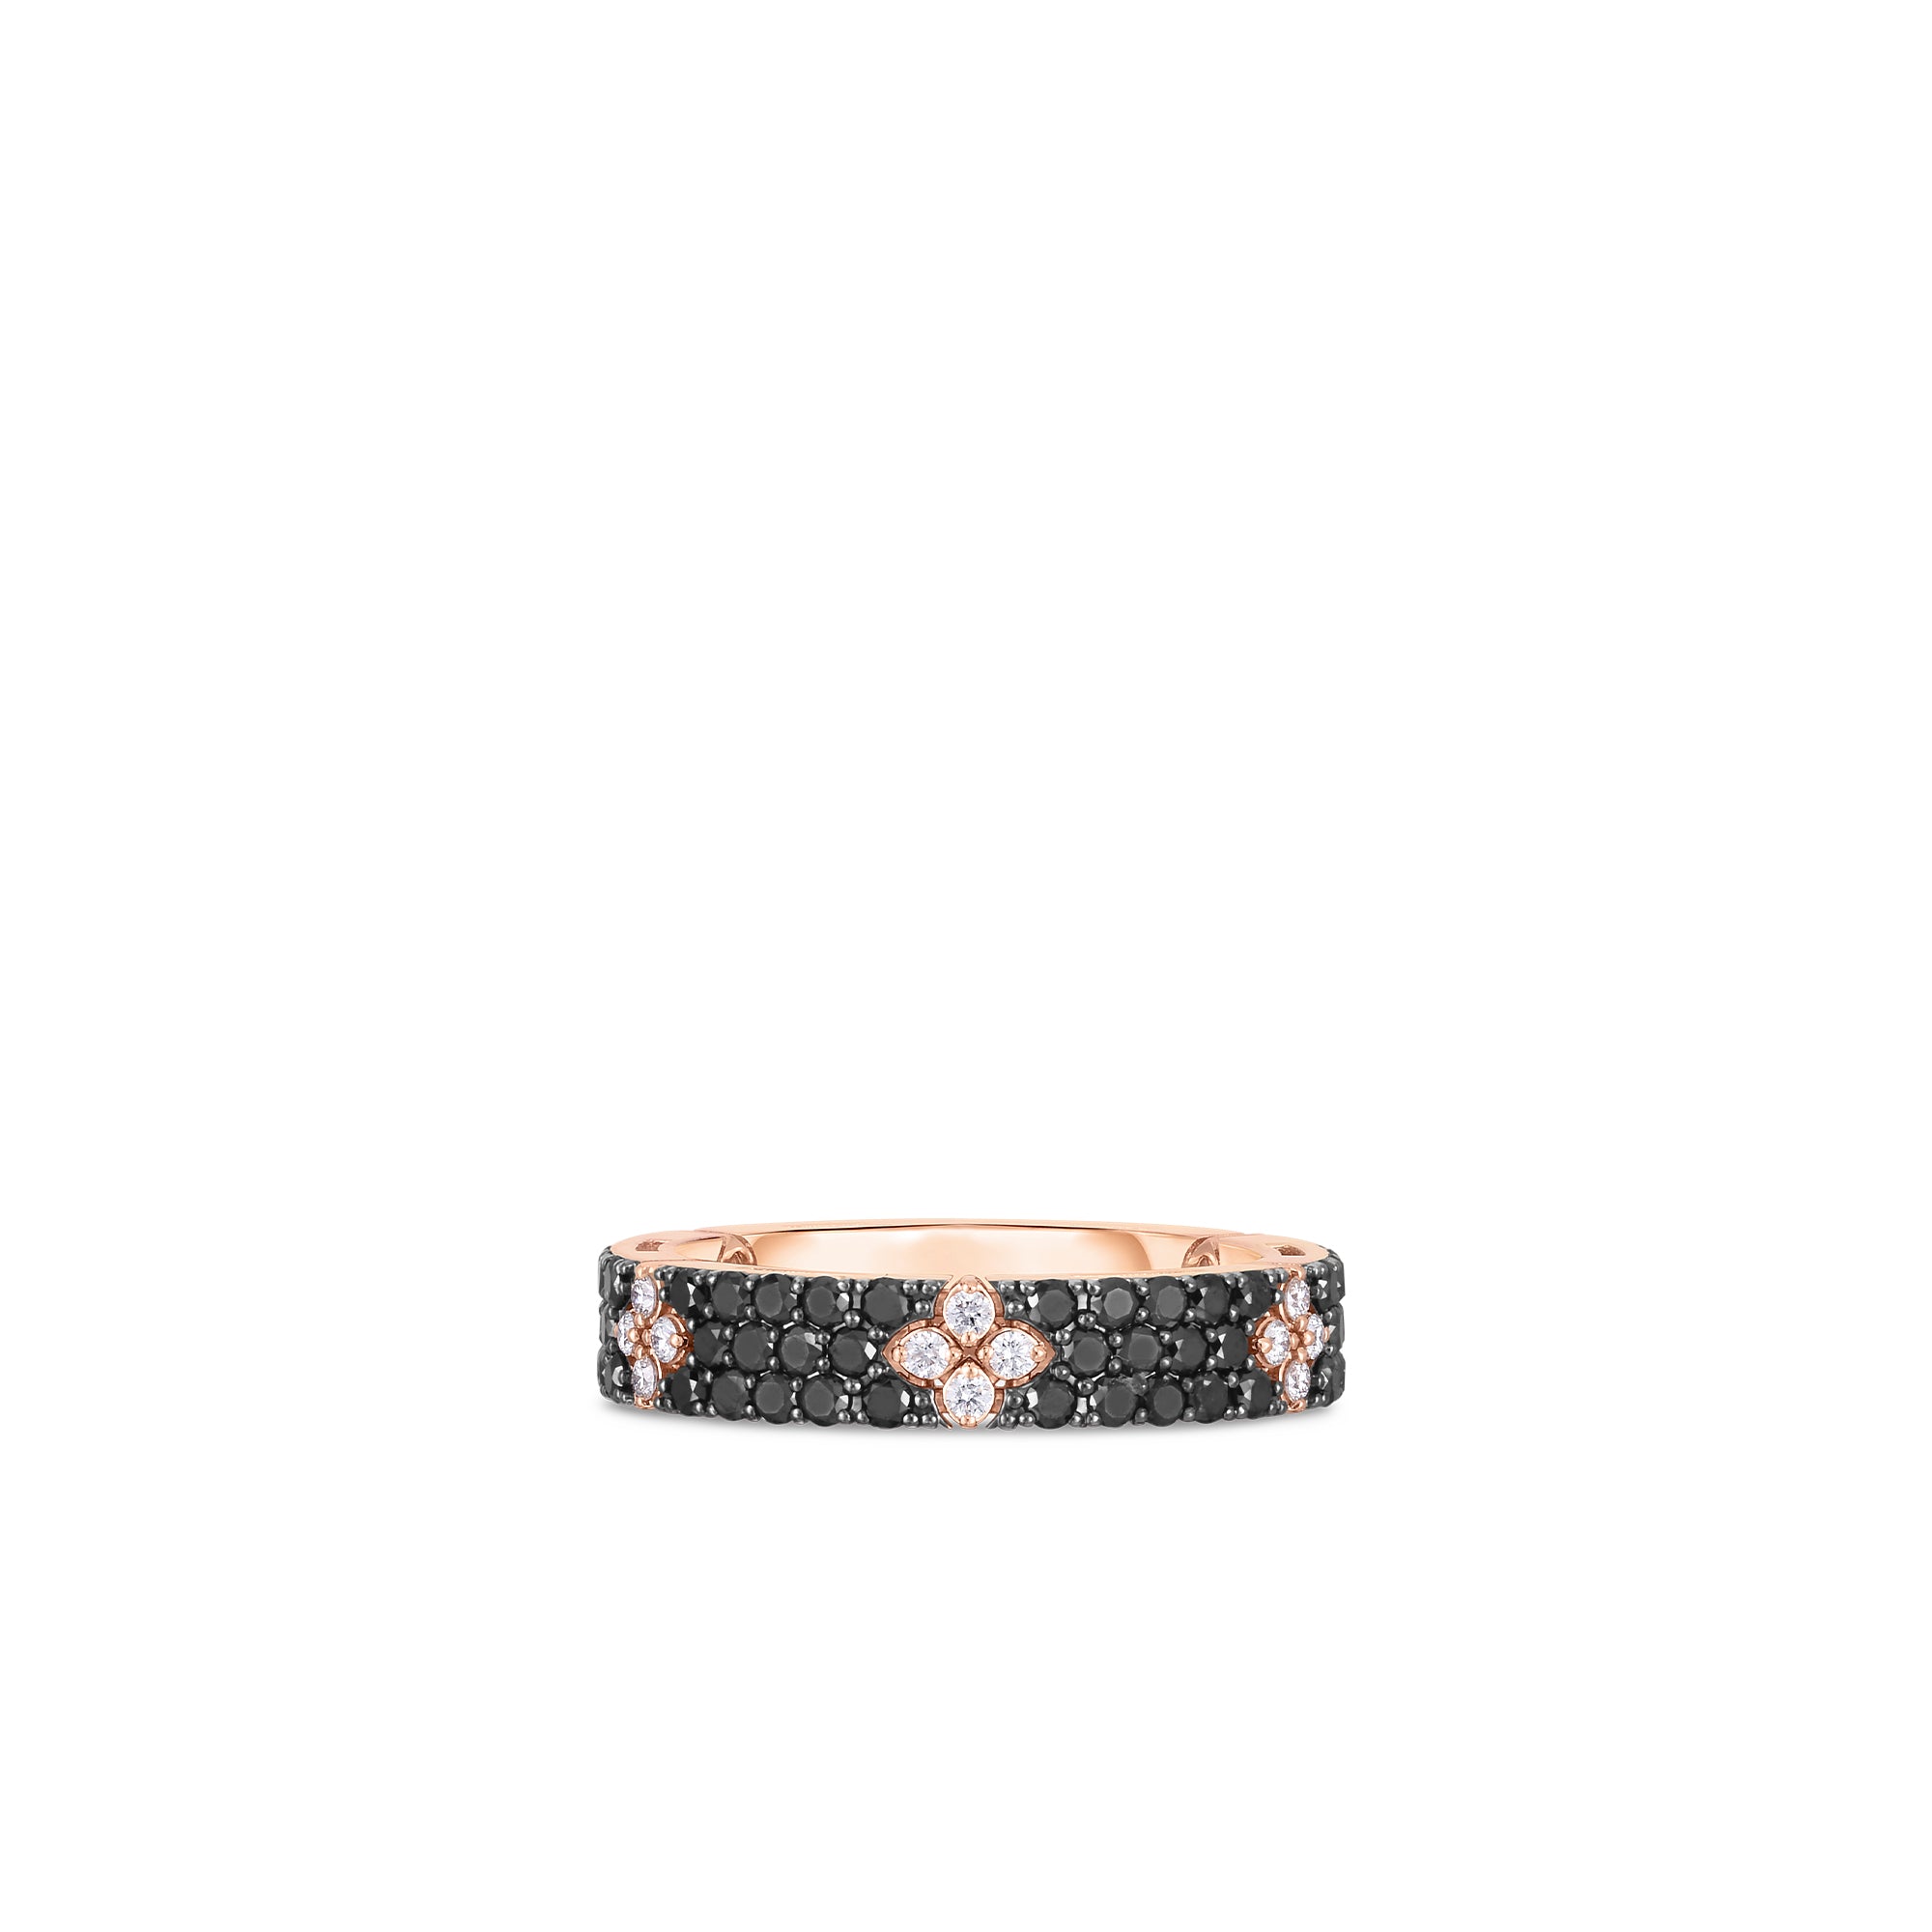 ROBERTO COIN 18K ROSE GOLD AND BLACK DIAMONDS 1.04CT ALONG WITH WHITE DIAMONDS 0.15CT BAND LOVE & VERONA COLLECTION